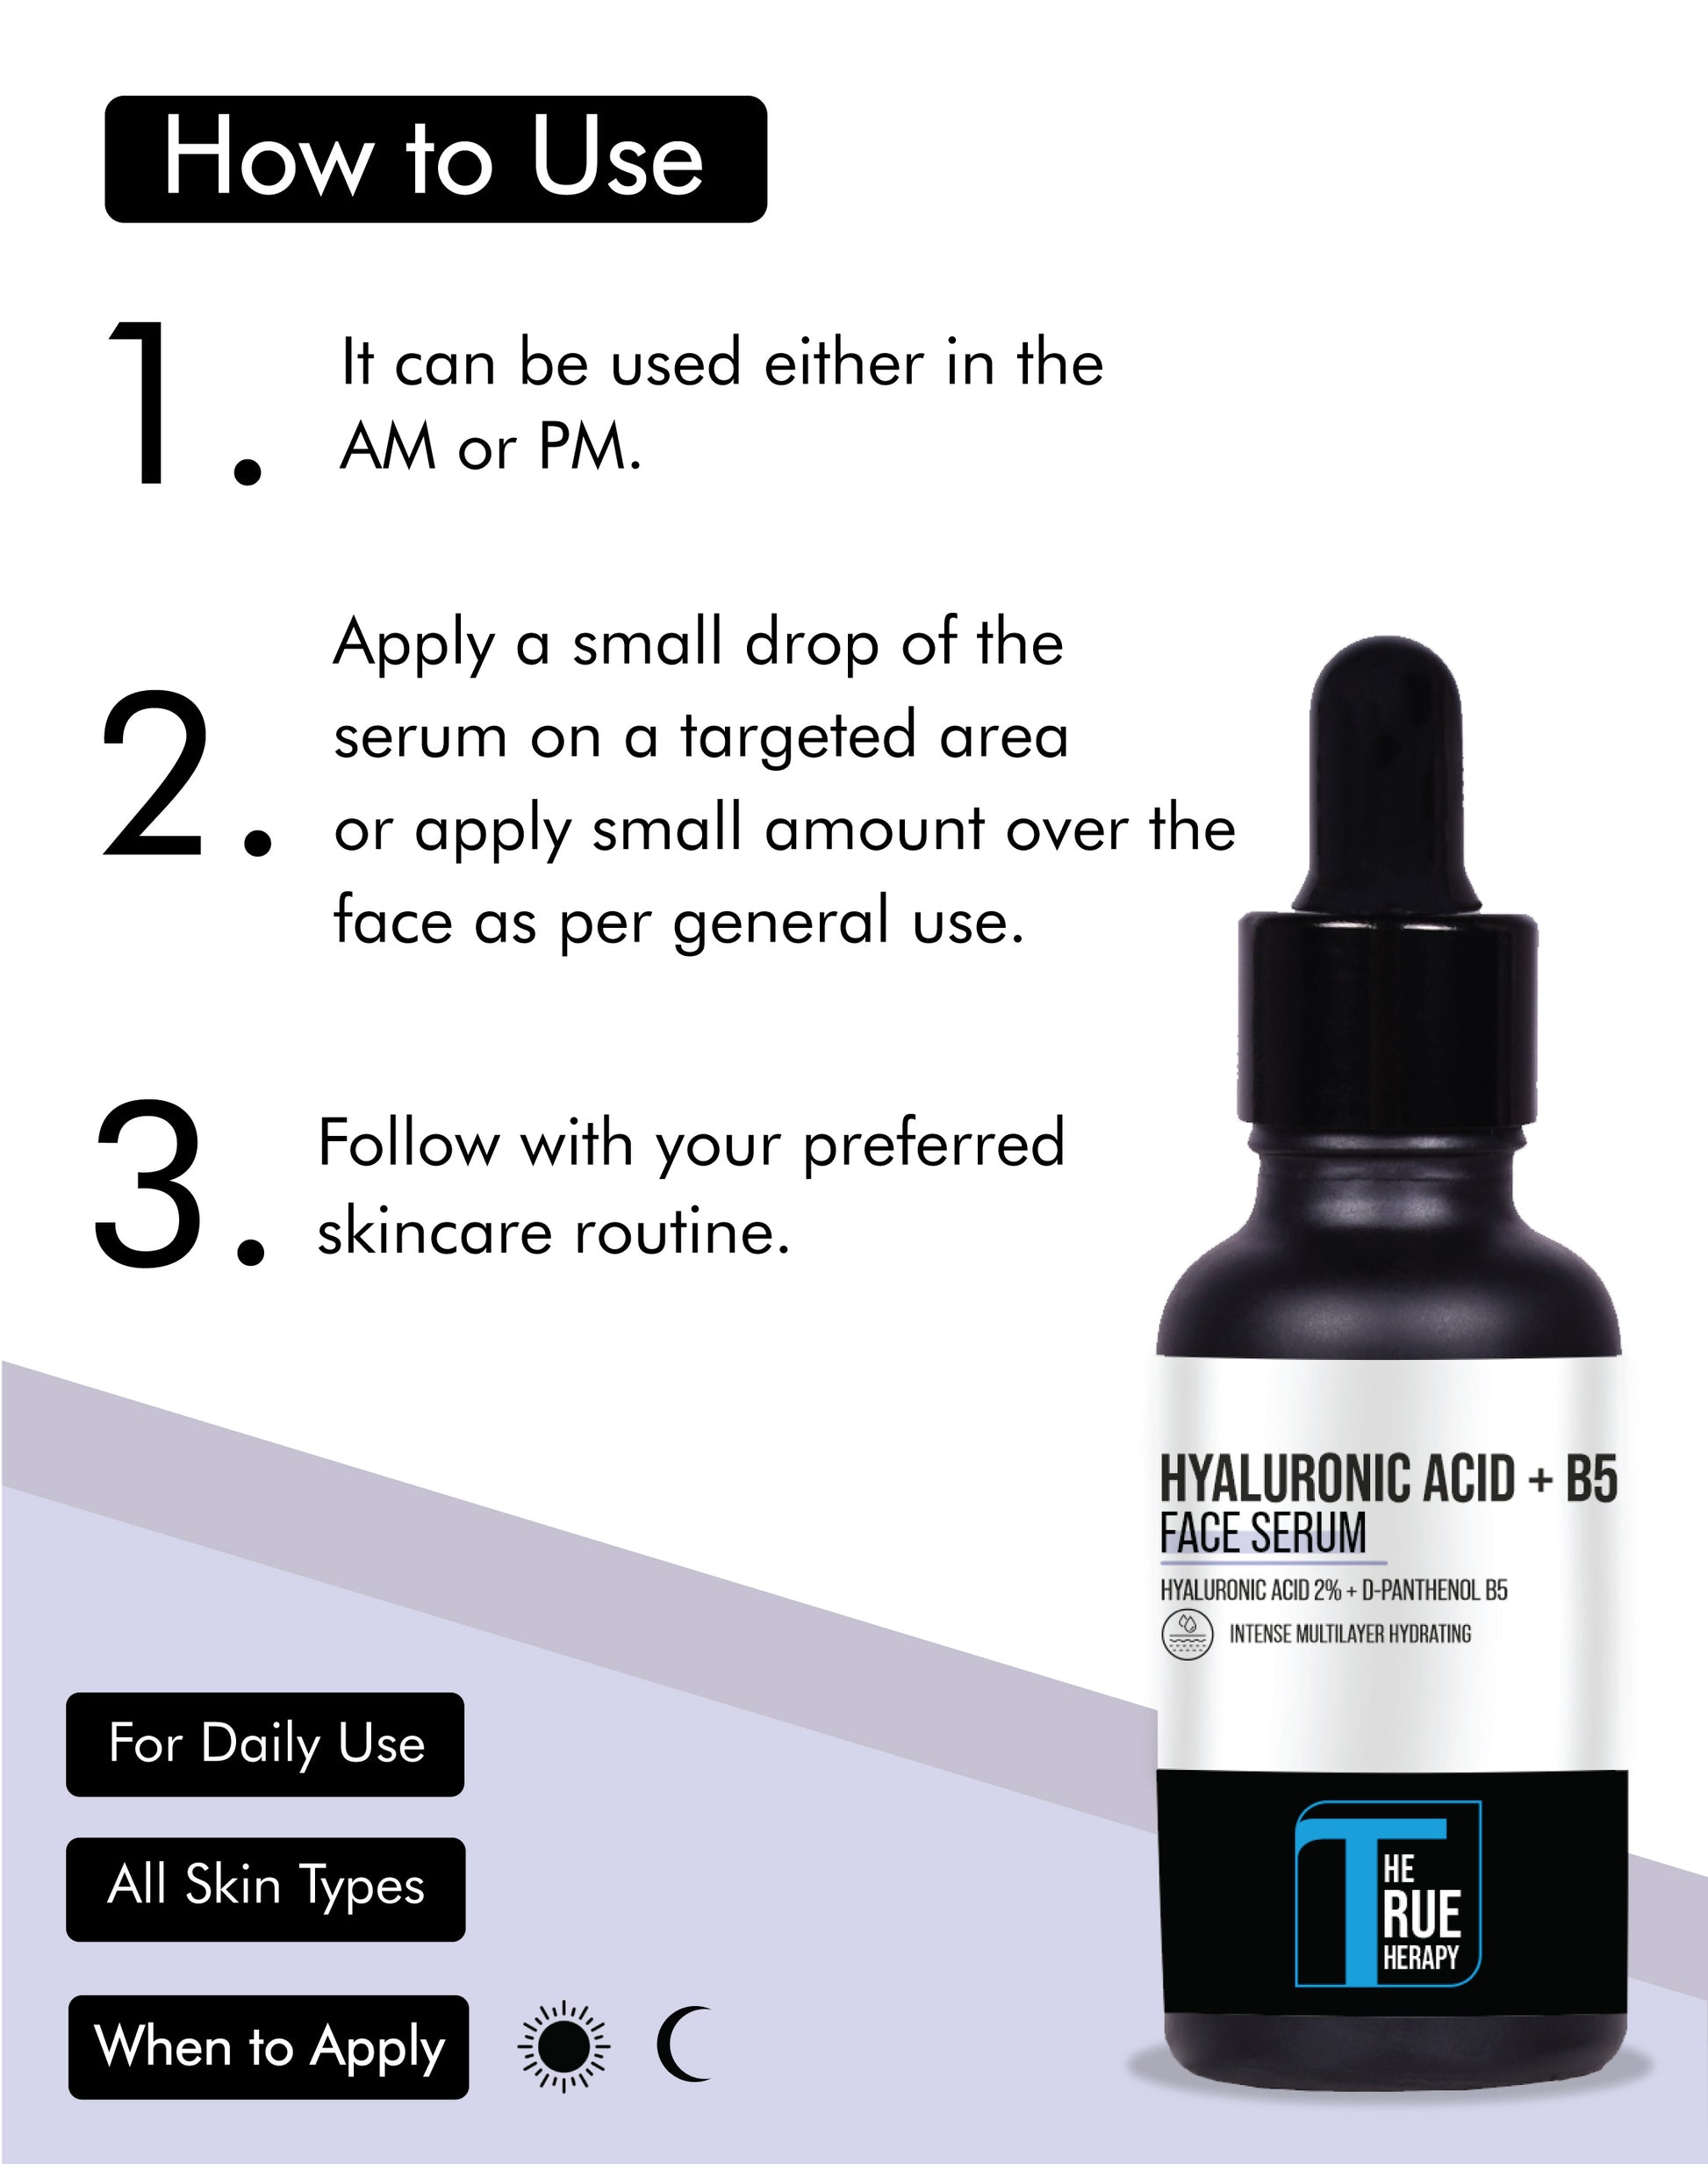 HYALURONIC ACID 2.0% B5 Face Serum - How To Use.